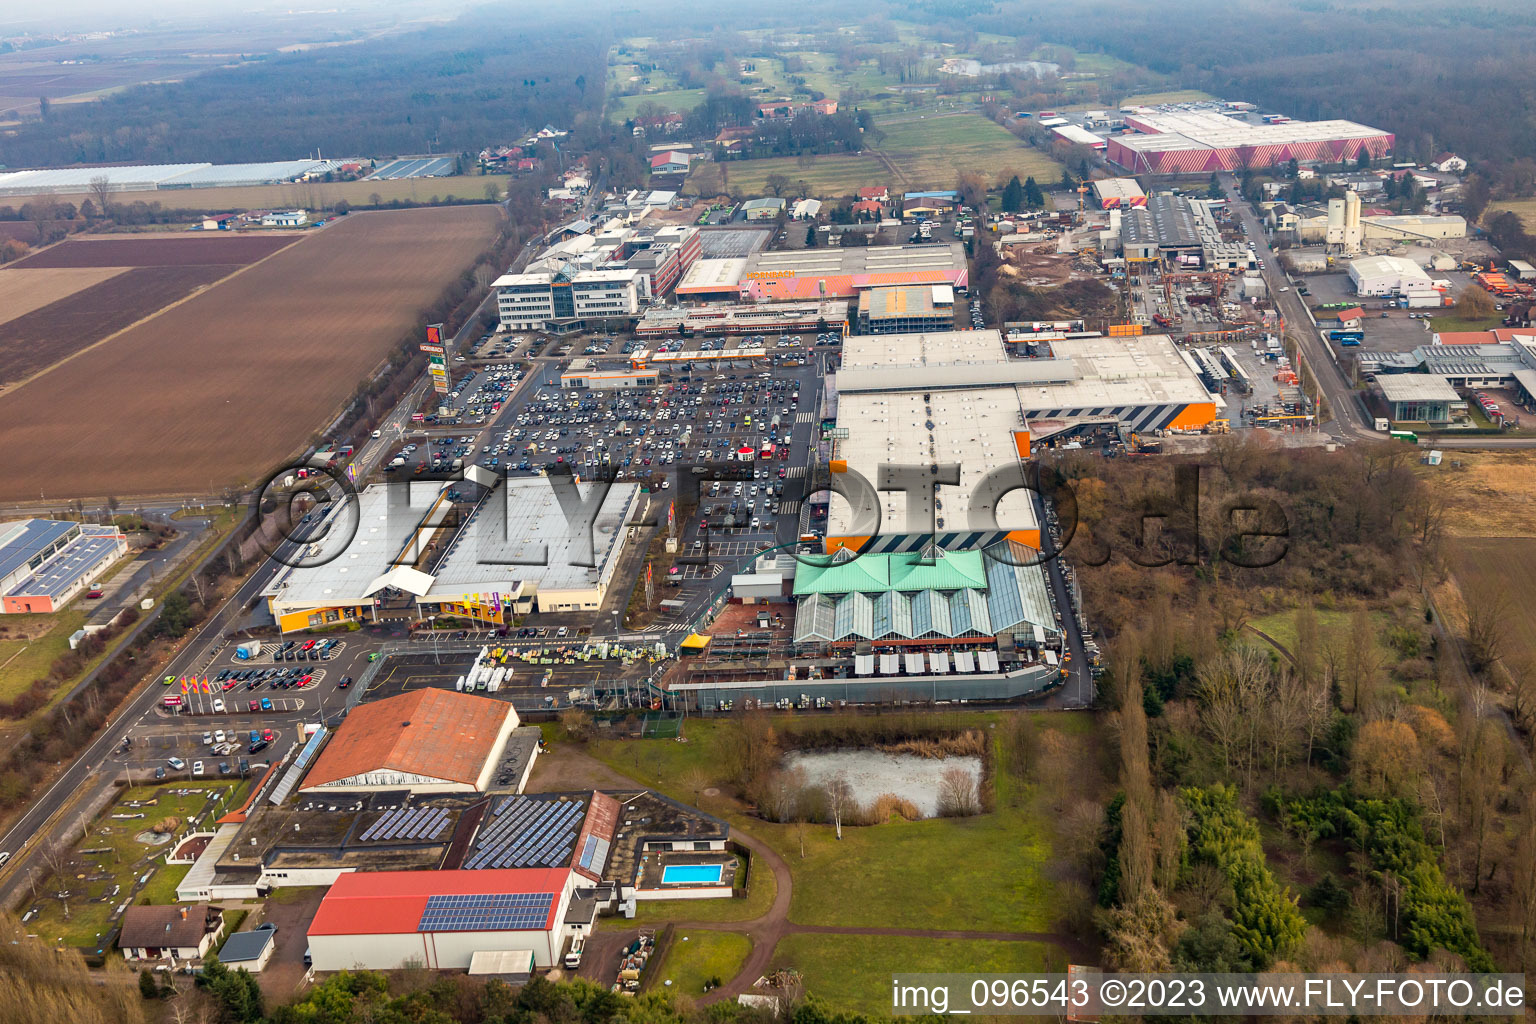 Hornbach hardware store from the west in Bornheim in the state Rhineland-Palatinate, Germany